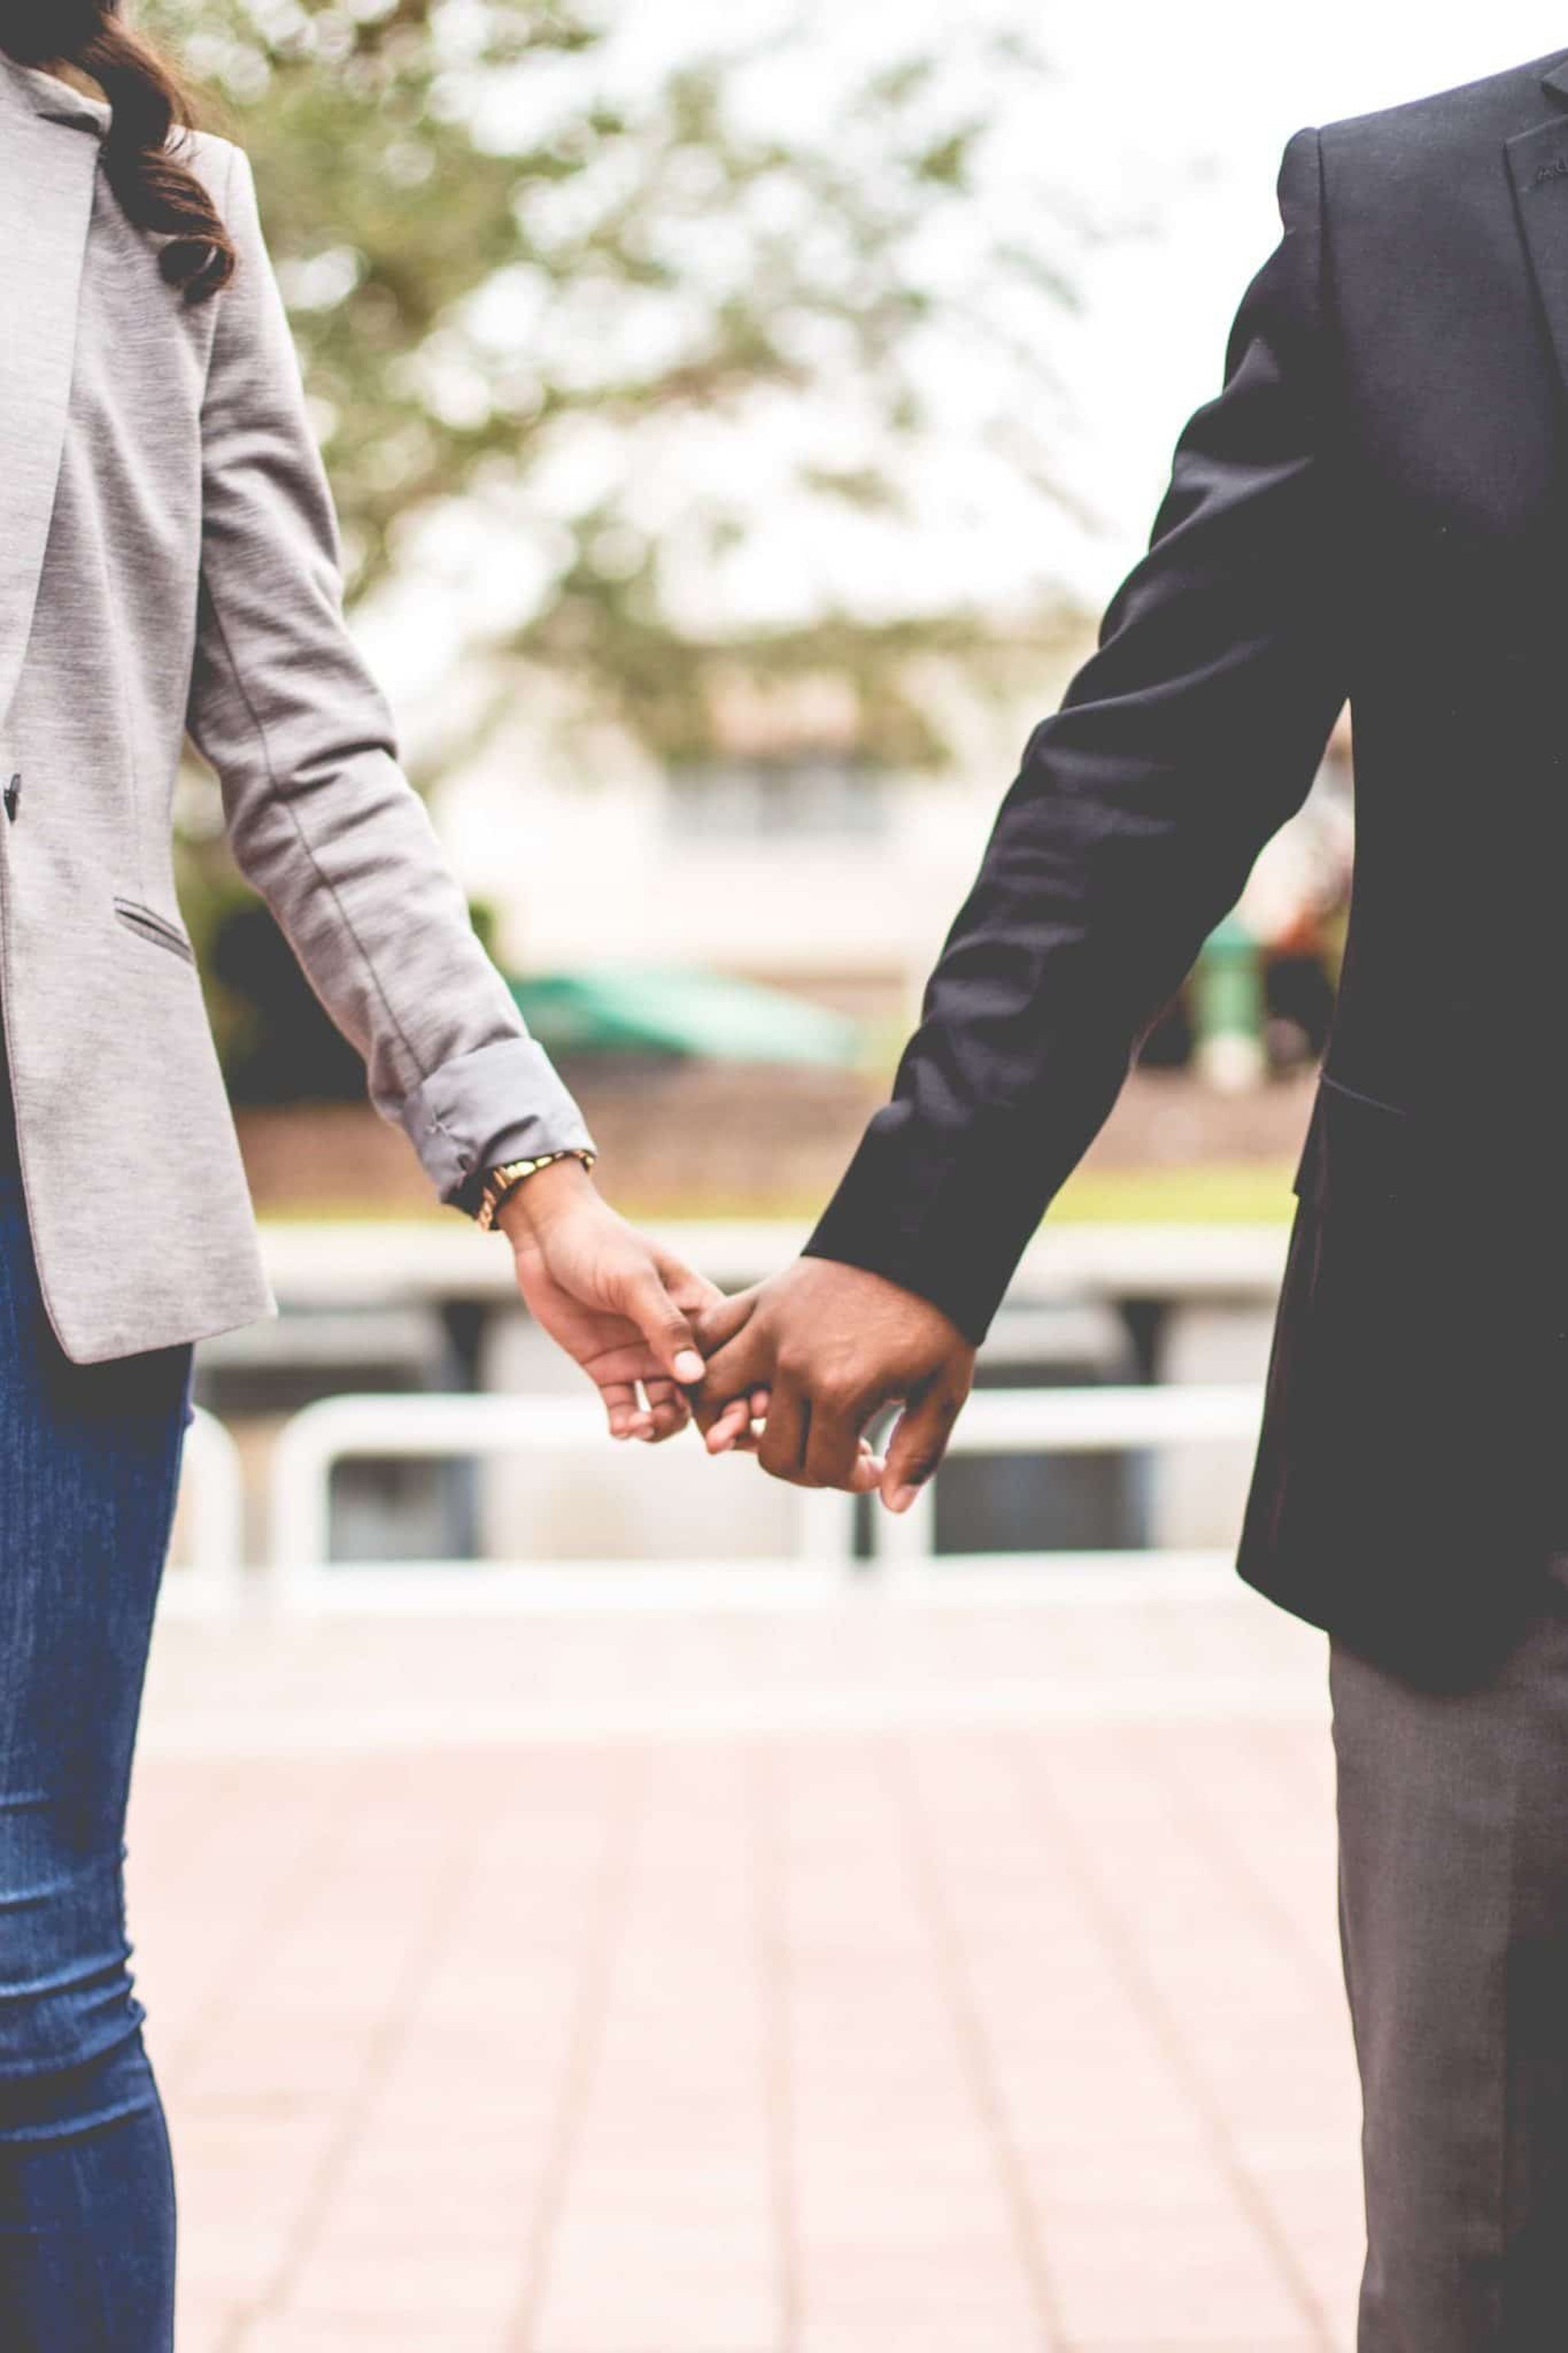 A man and woman holding hands | Source: Pexels